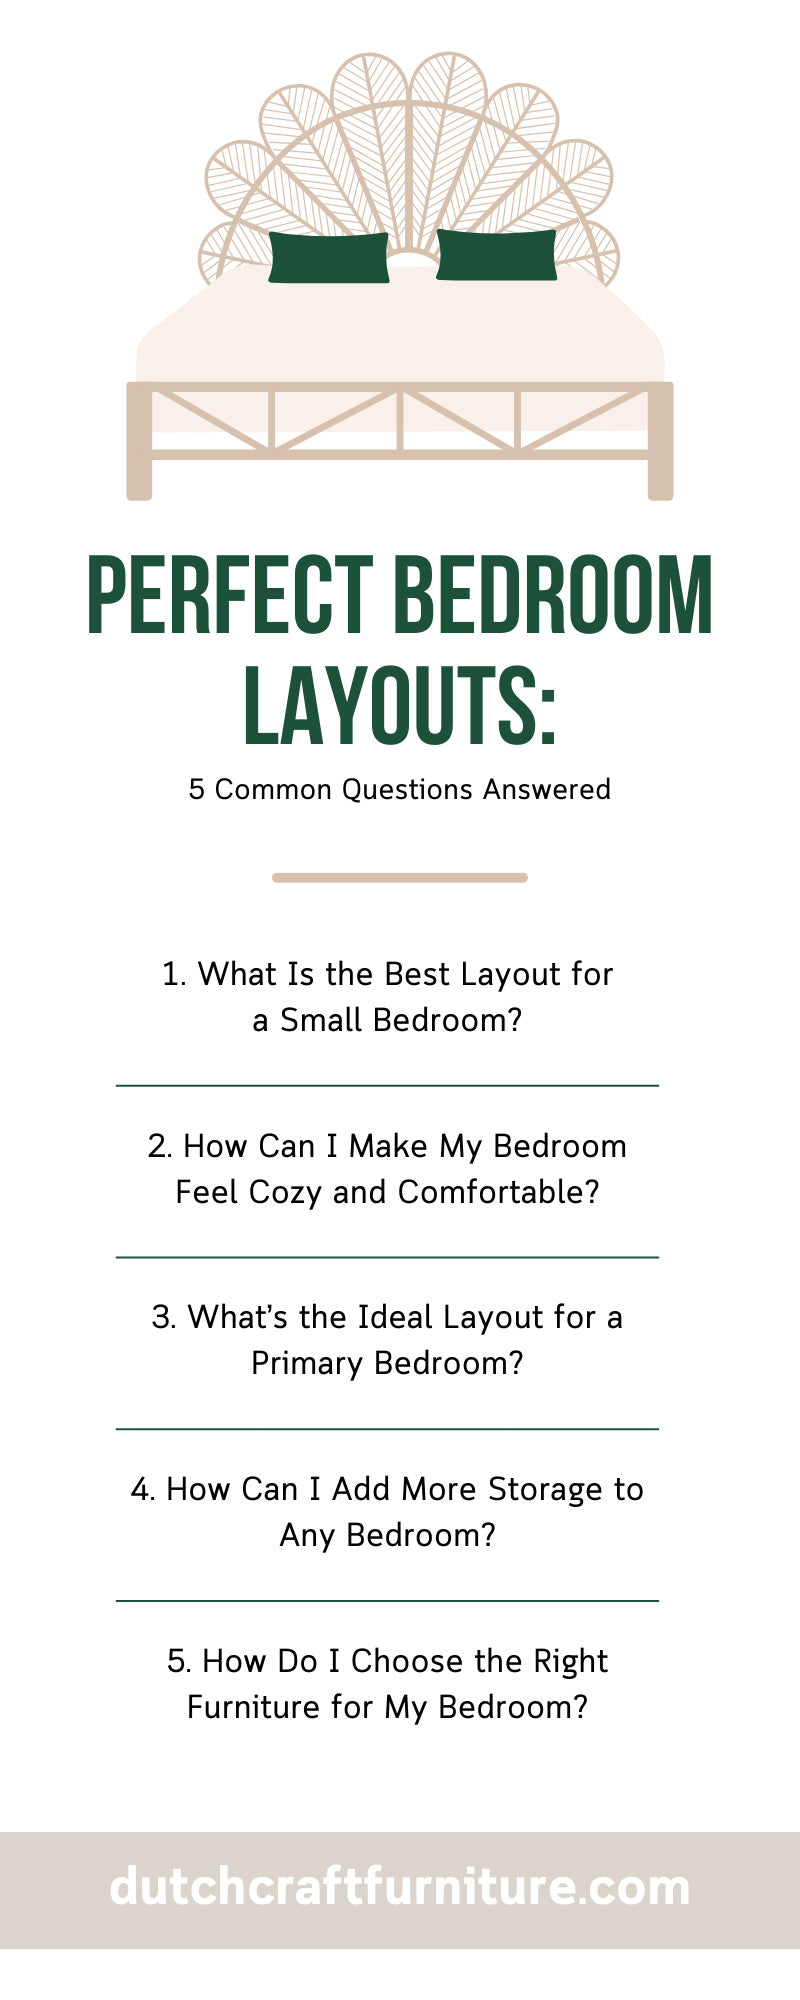 Perfect Bedroom Layouts: 5 Common Questions Answered